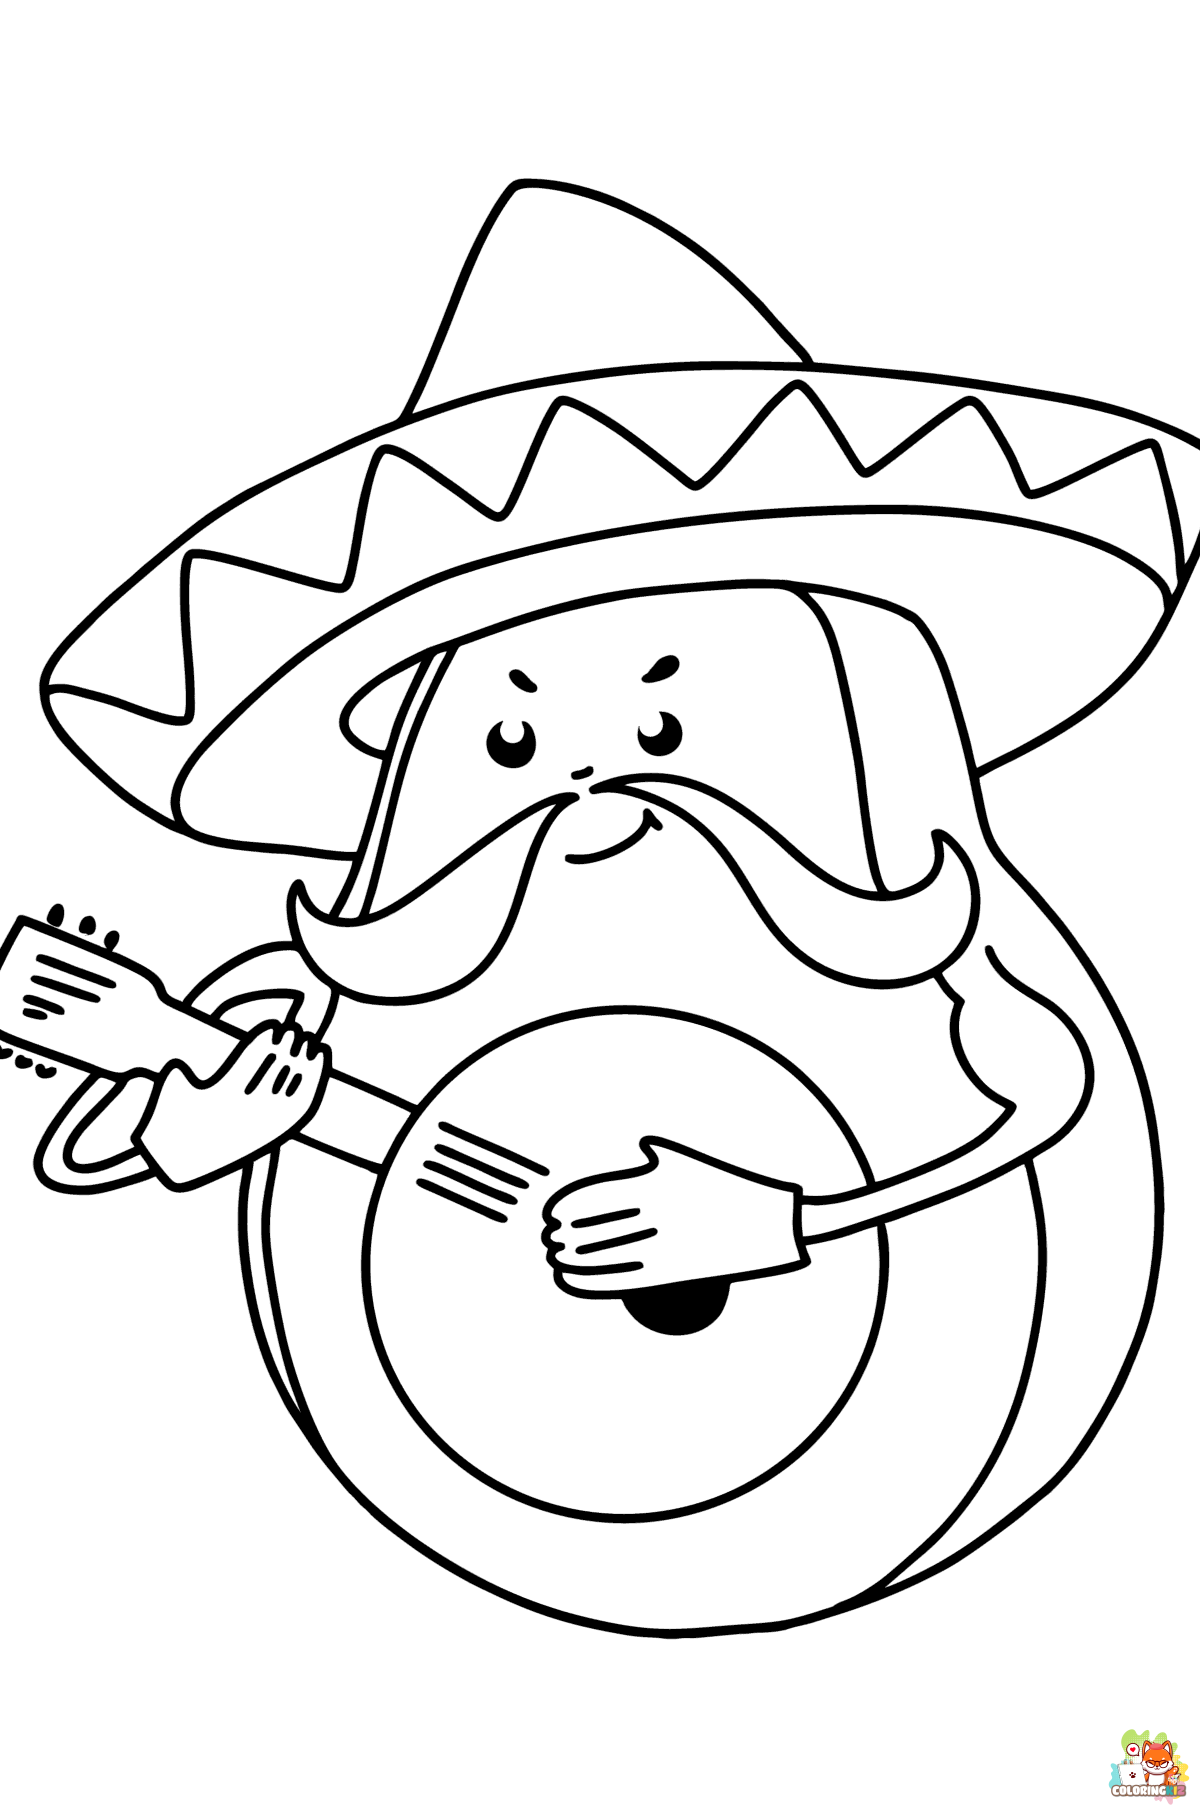 Free avocado coloring pages for kids